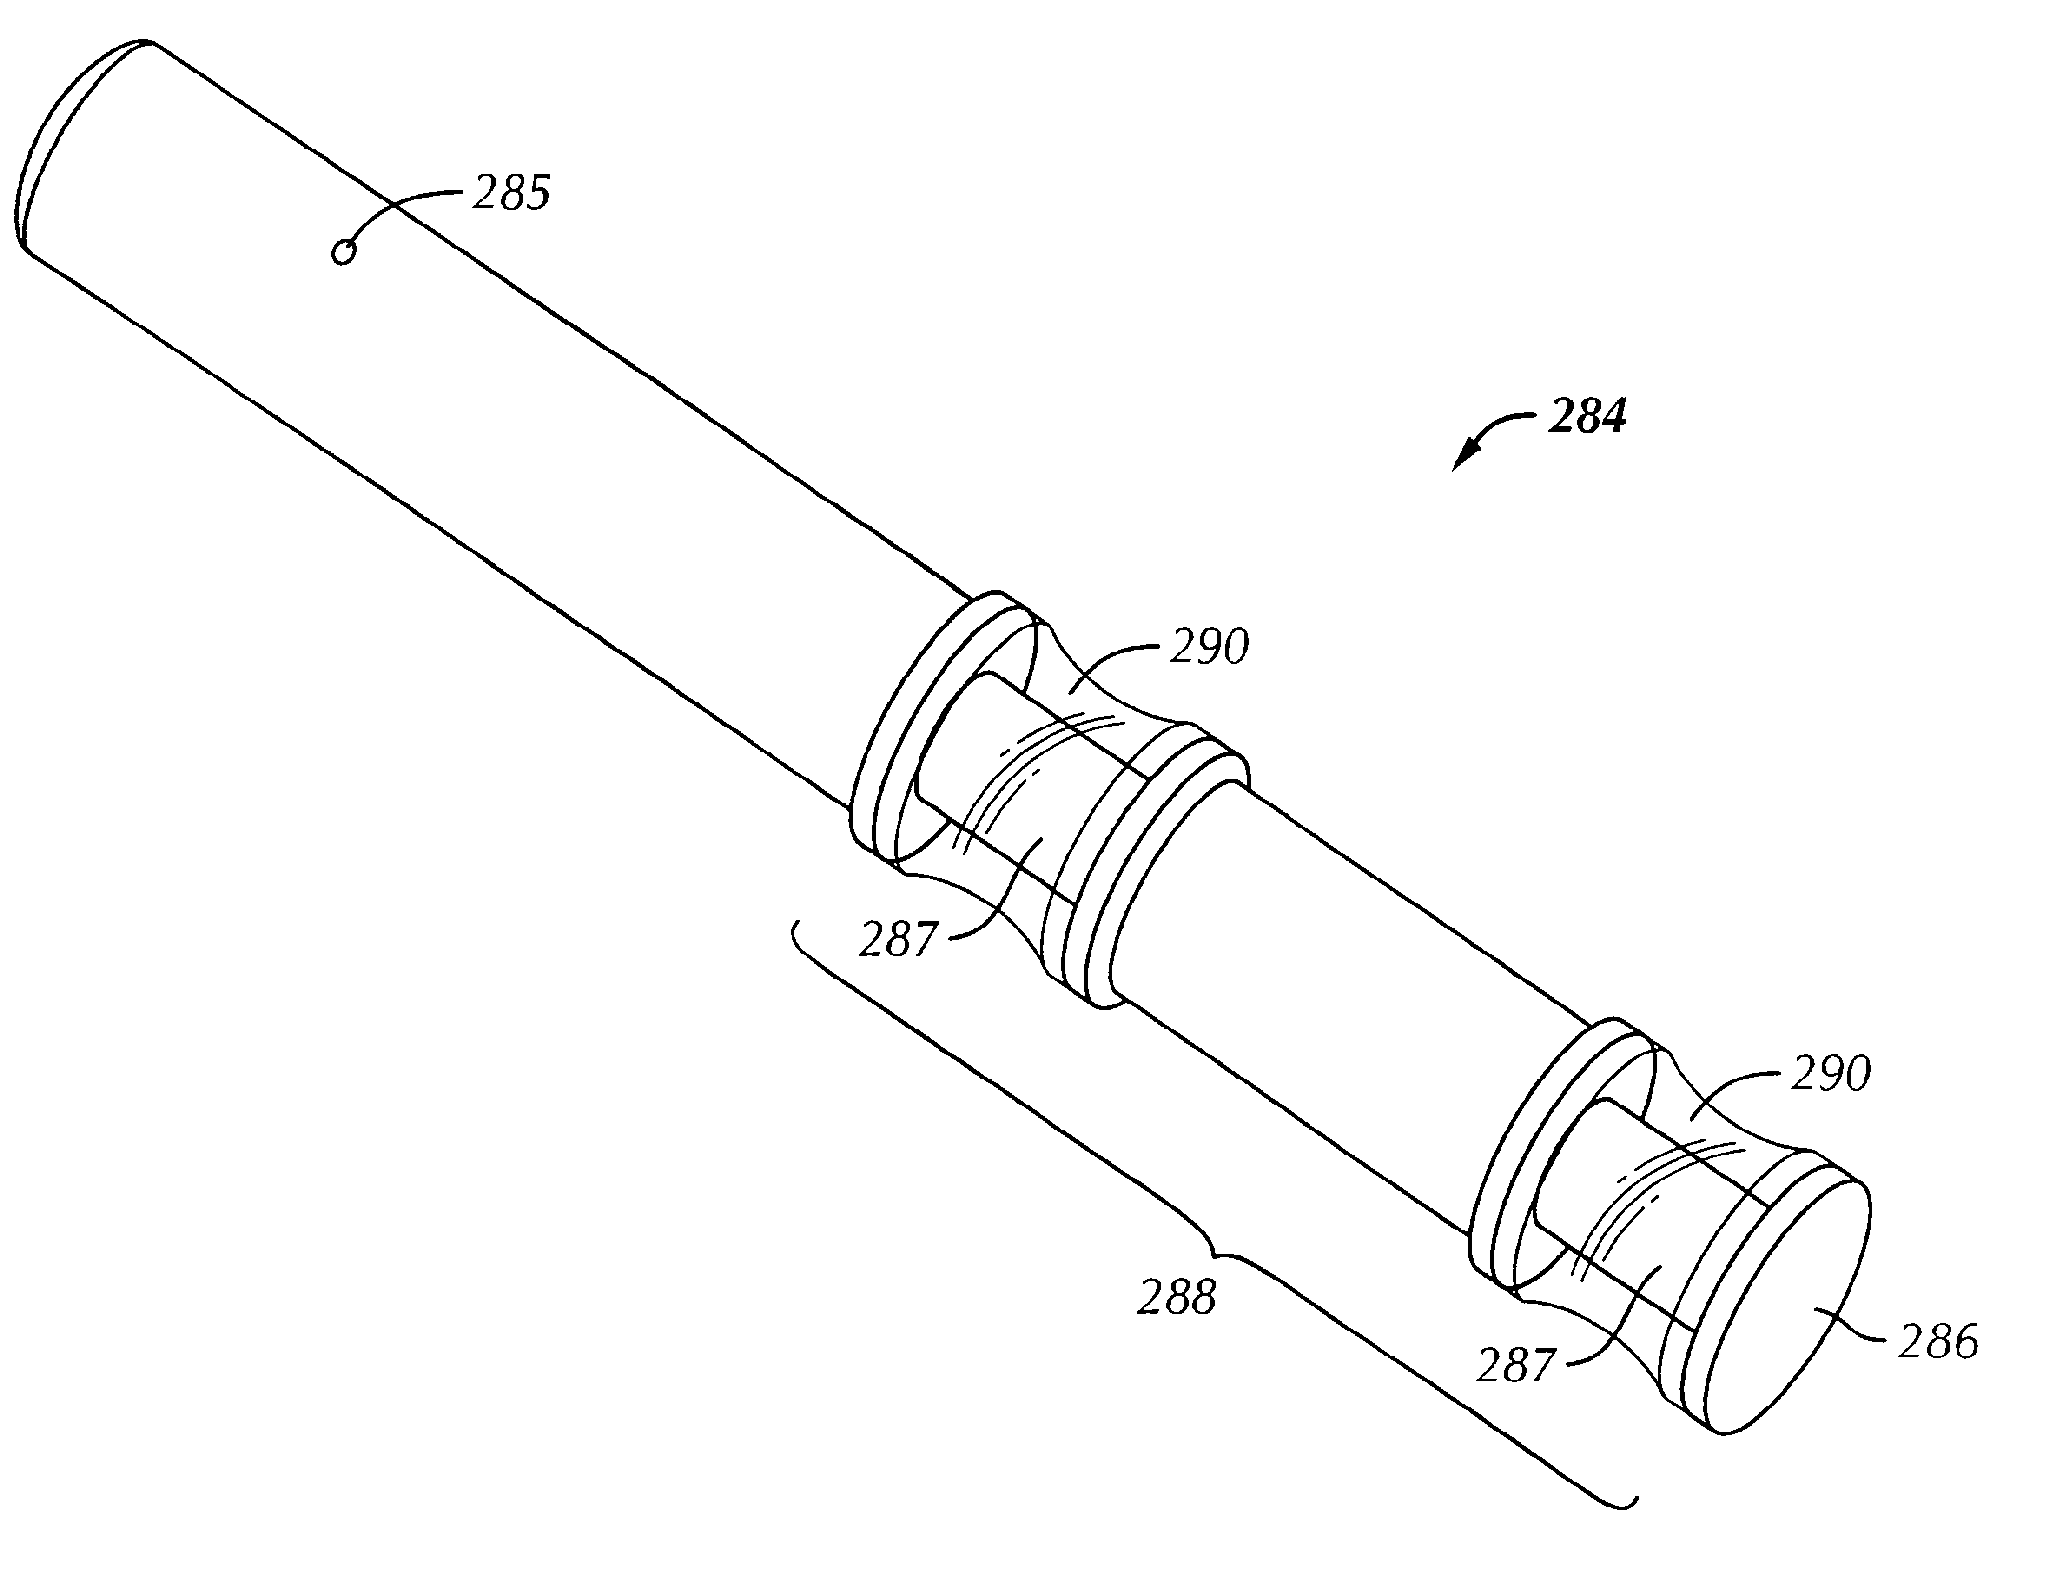 Spinal stabilization device